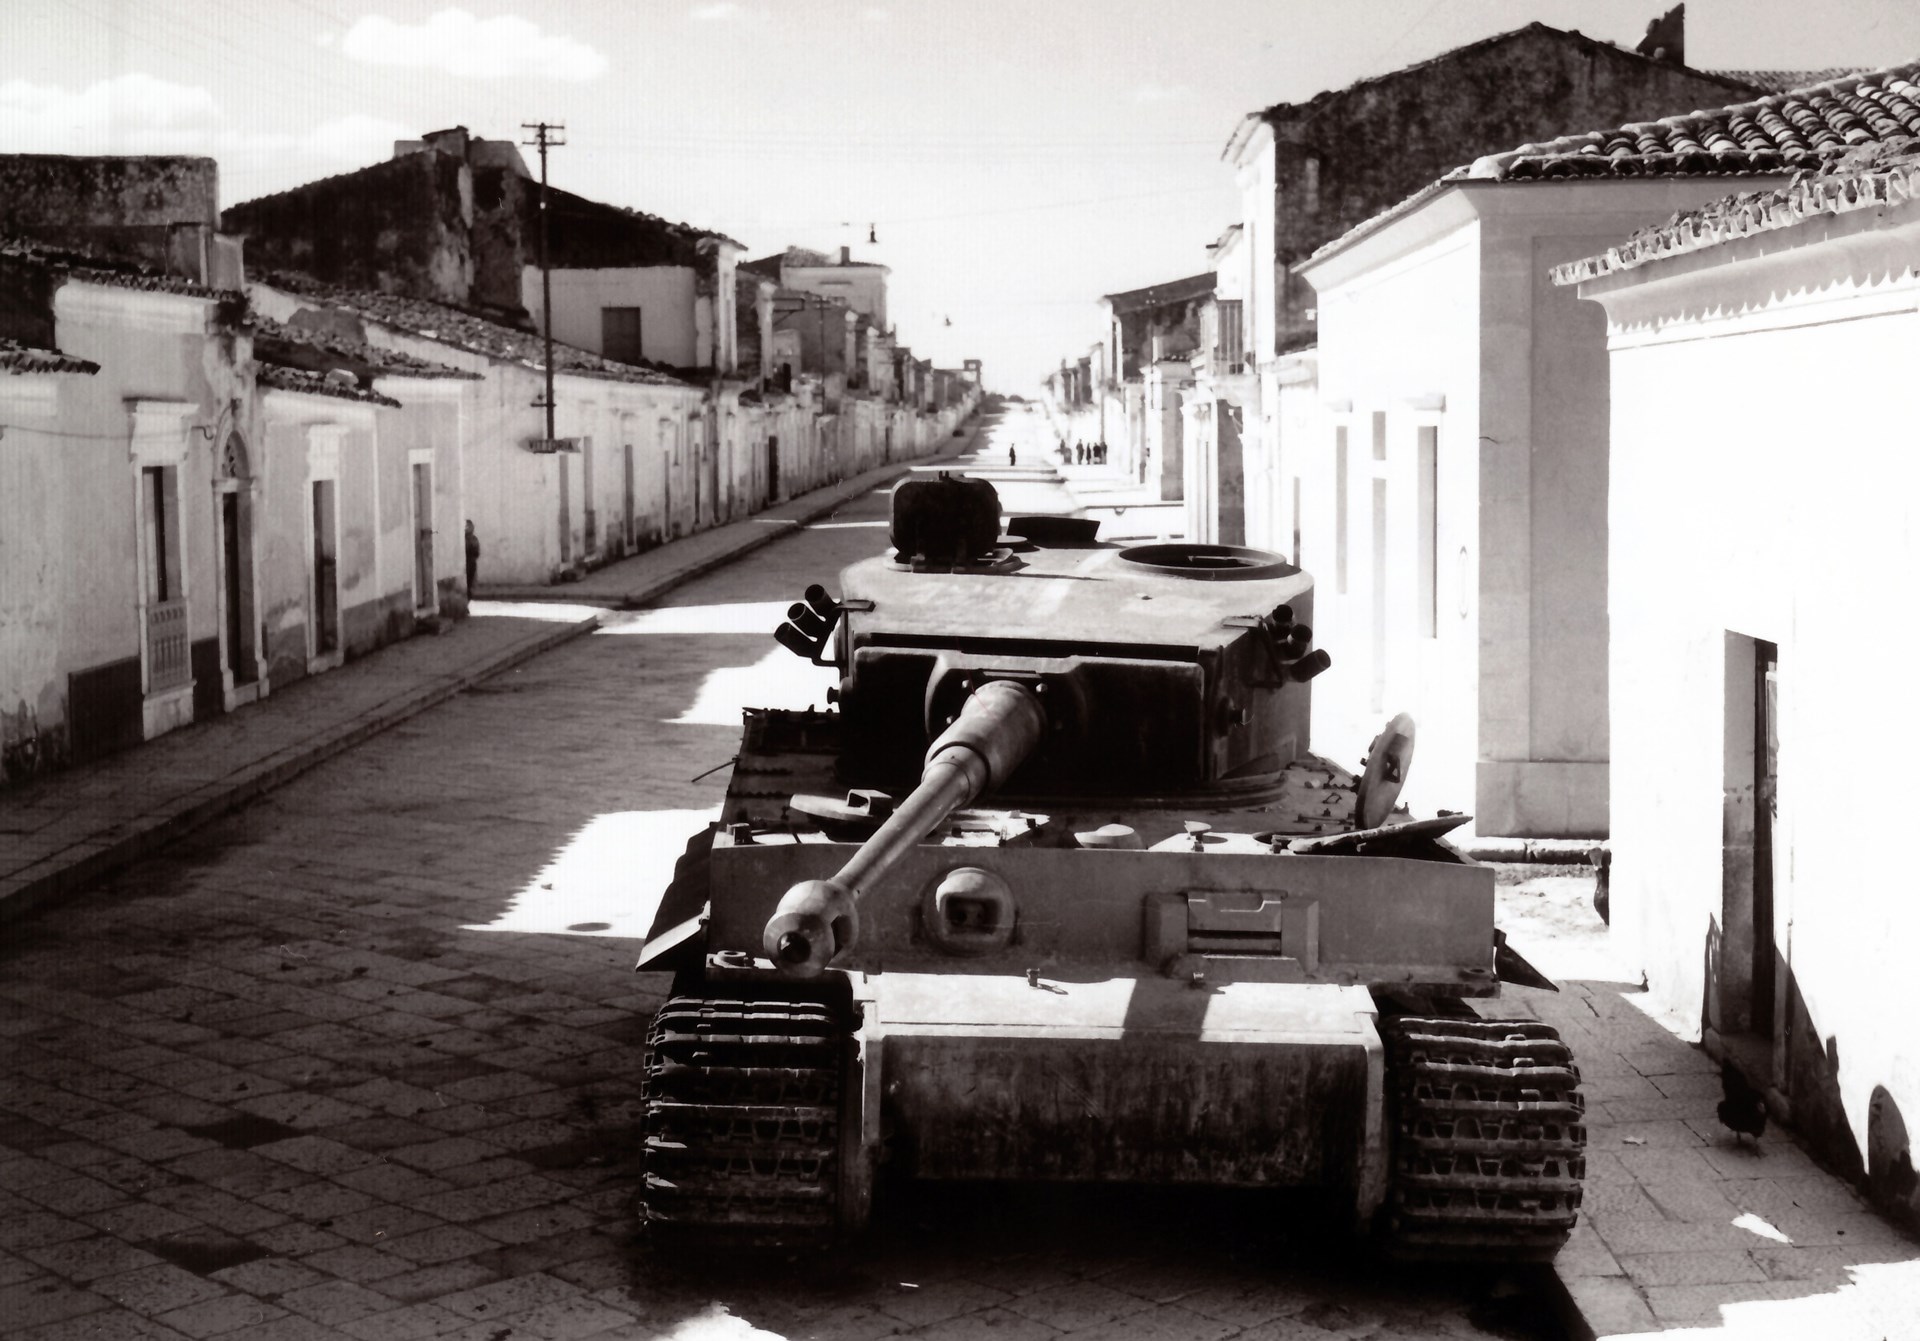 15)	The massive German Pzkw VI Tiger I, knocked out on the streets of Biscari, Sicily.  Sixteen of these 60-ton tanks were lost during the campaign on Sicily.  NARA